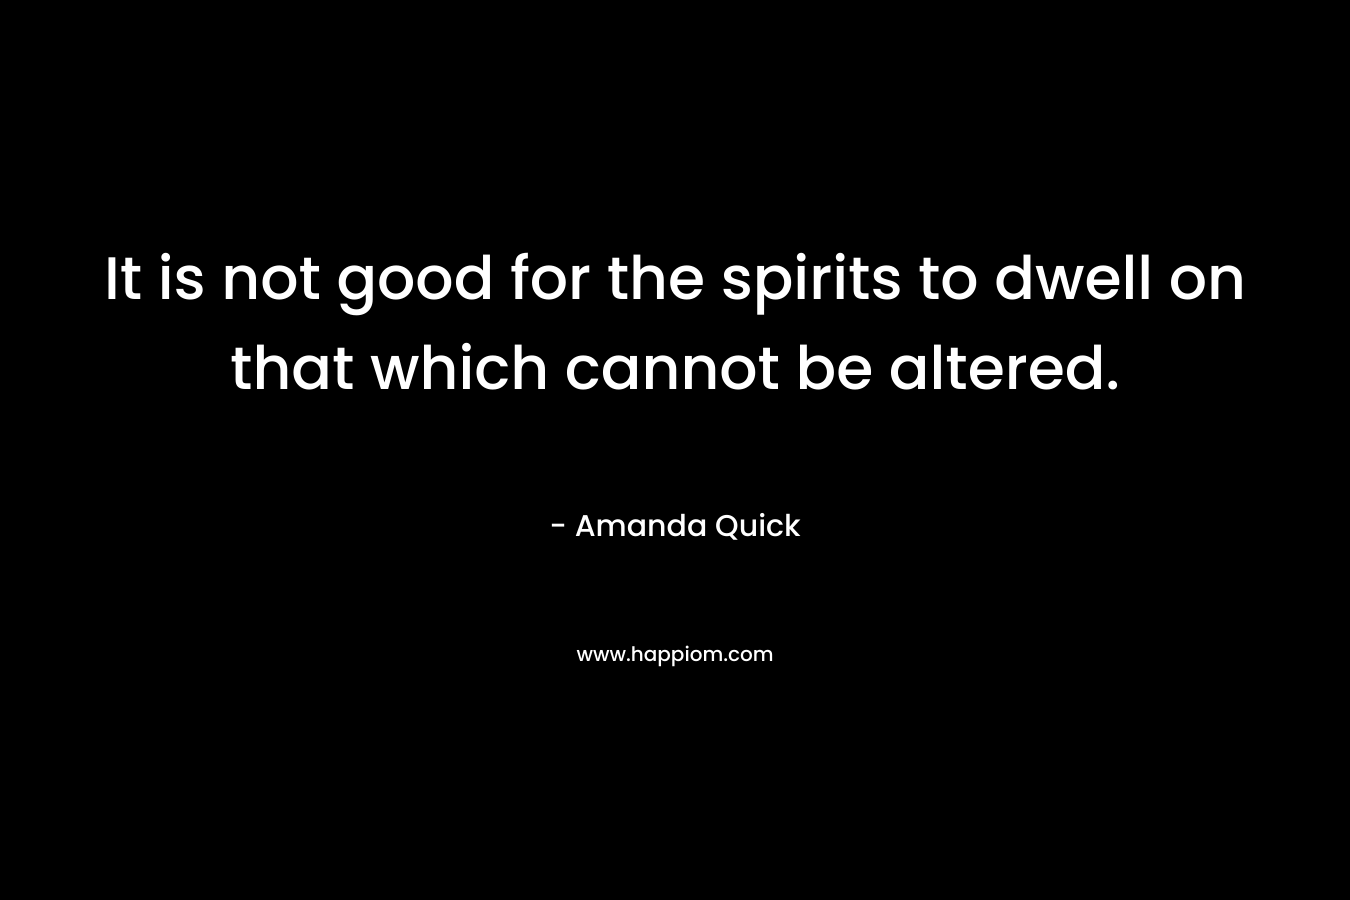 It is not good for the spirits to dwell on that which cannot be altered.